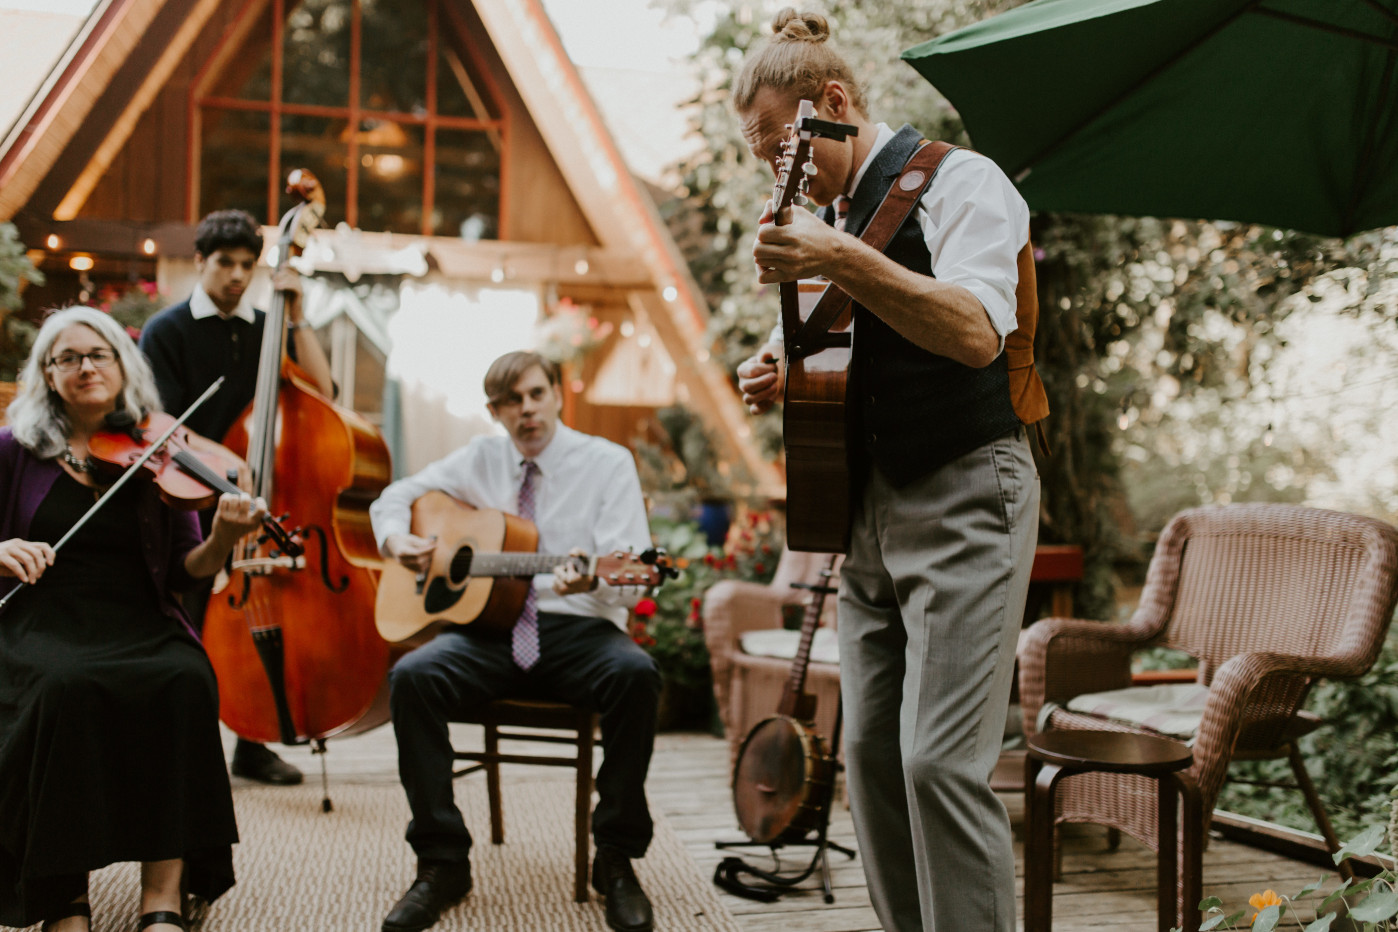 A band plays for the wedding in Corvallis, Oregon. Intimate wedding photography in Corvallis Oregon by Sienna Plus Josh.